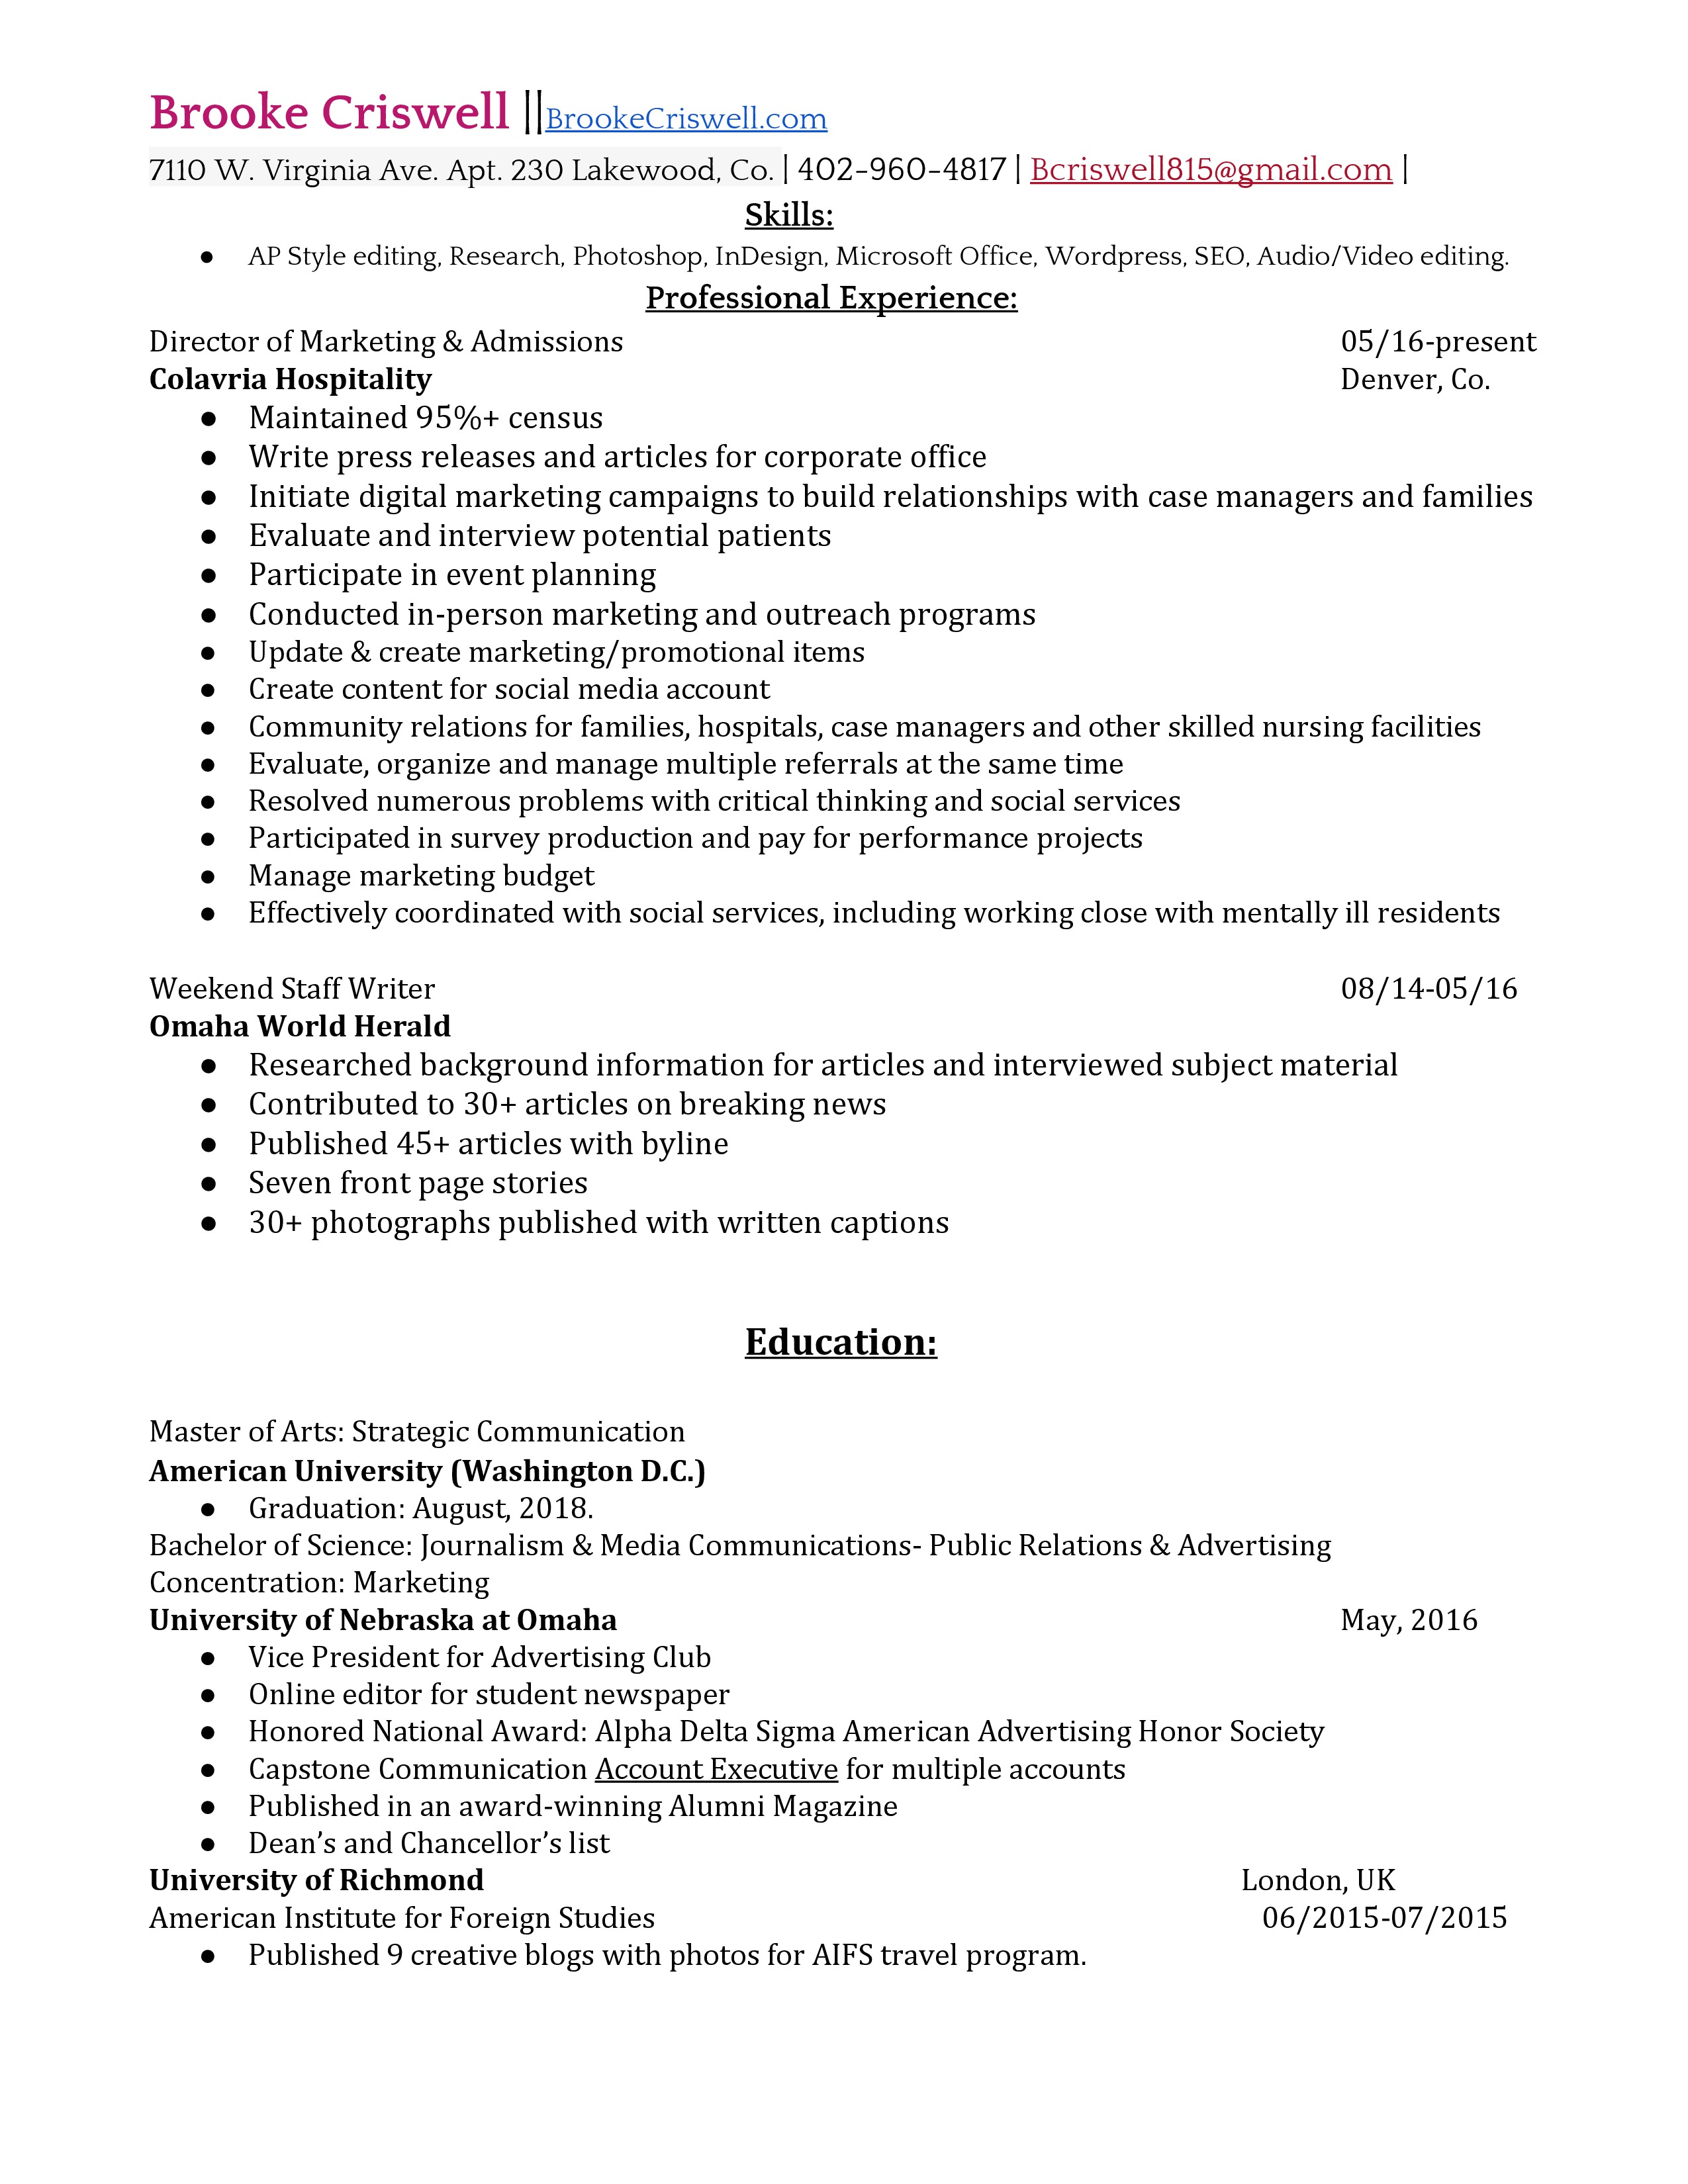 Resume with published articles